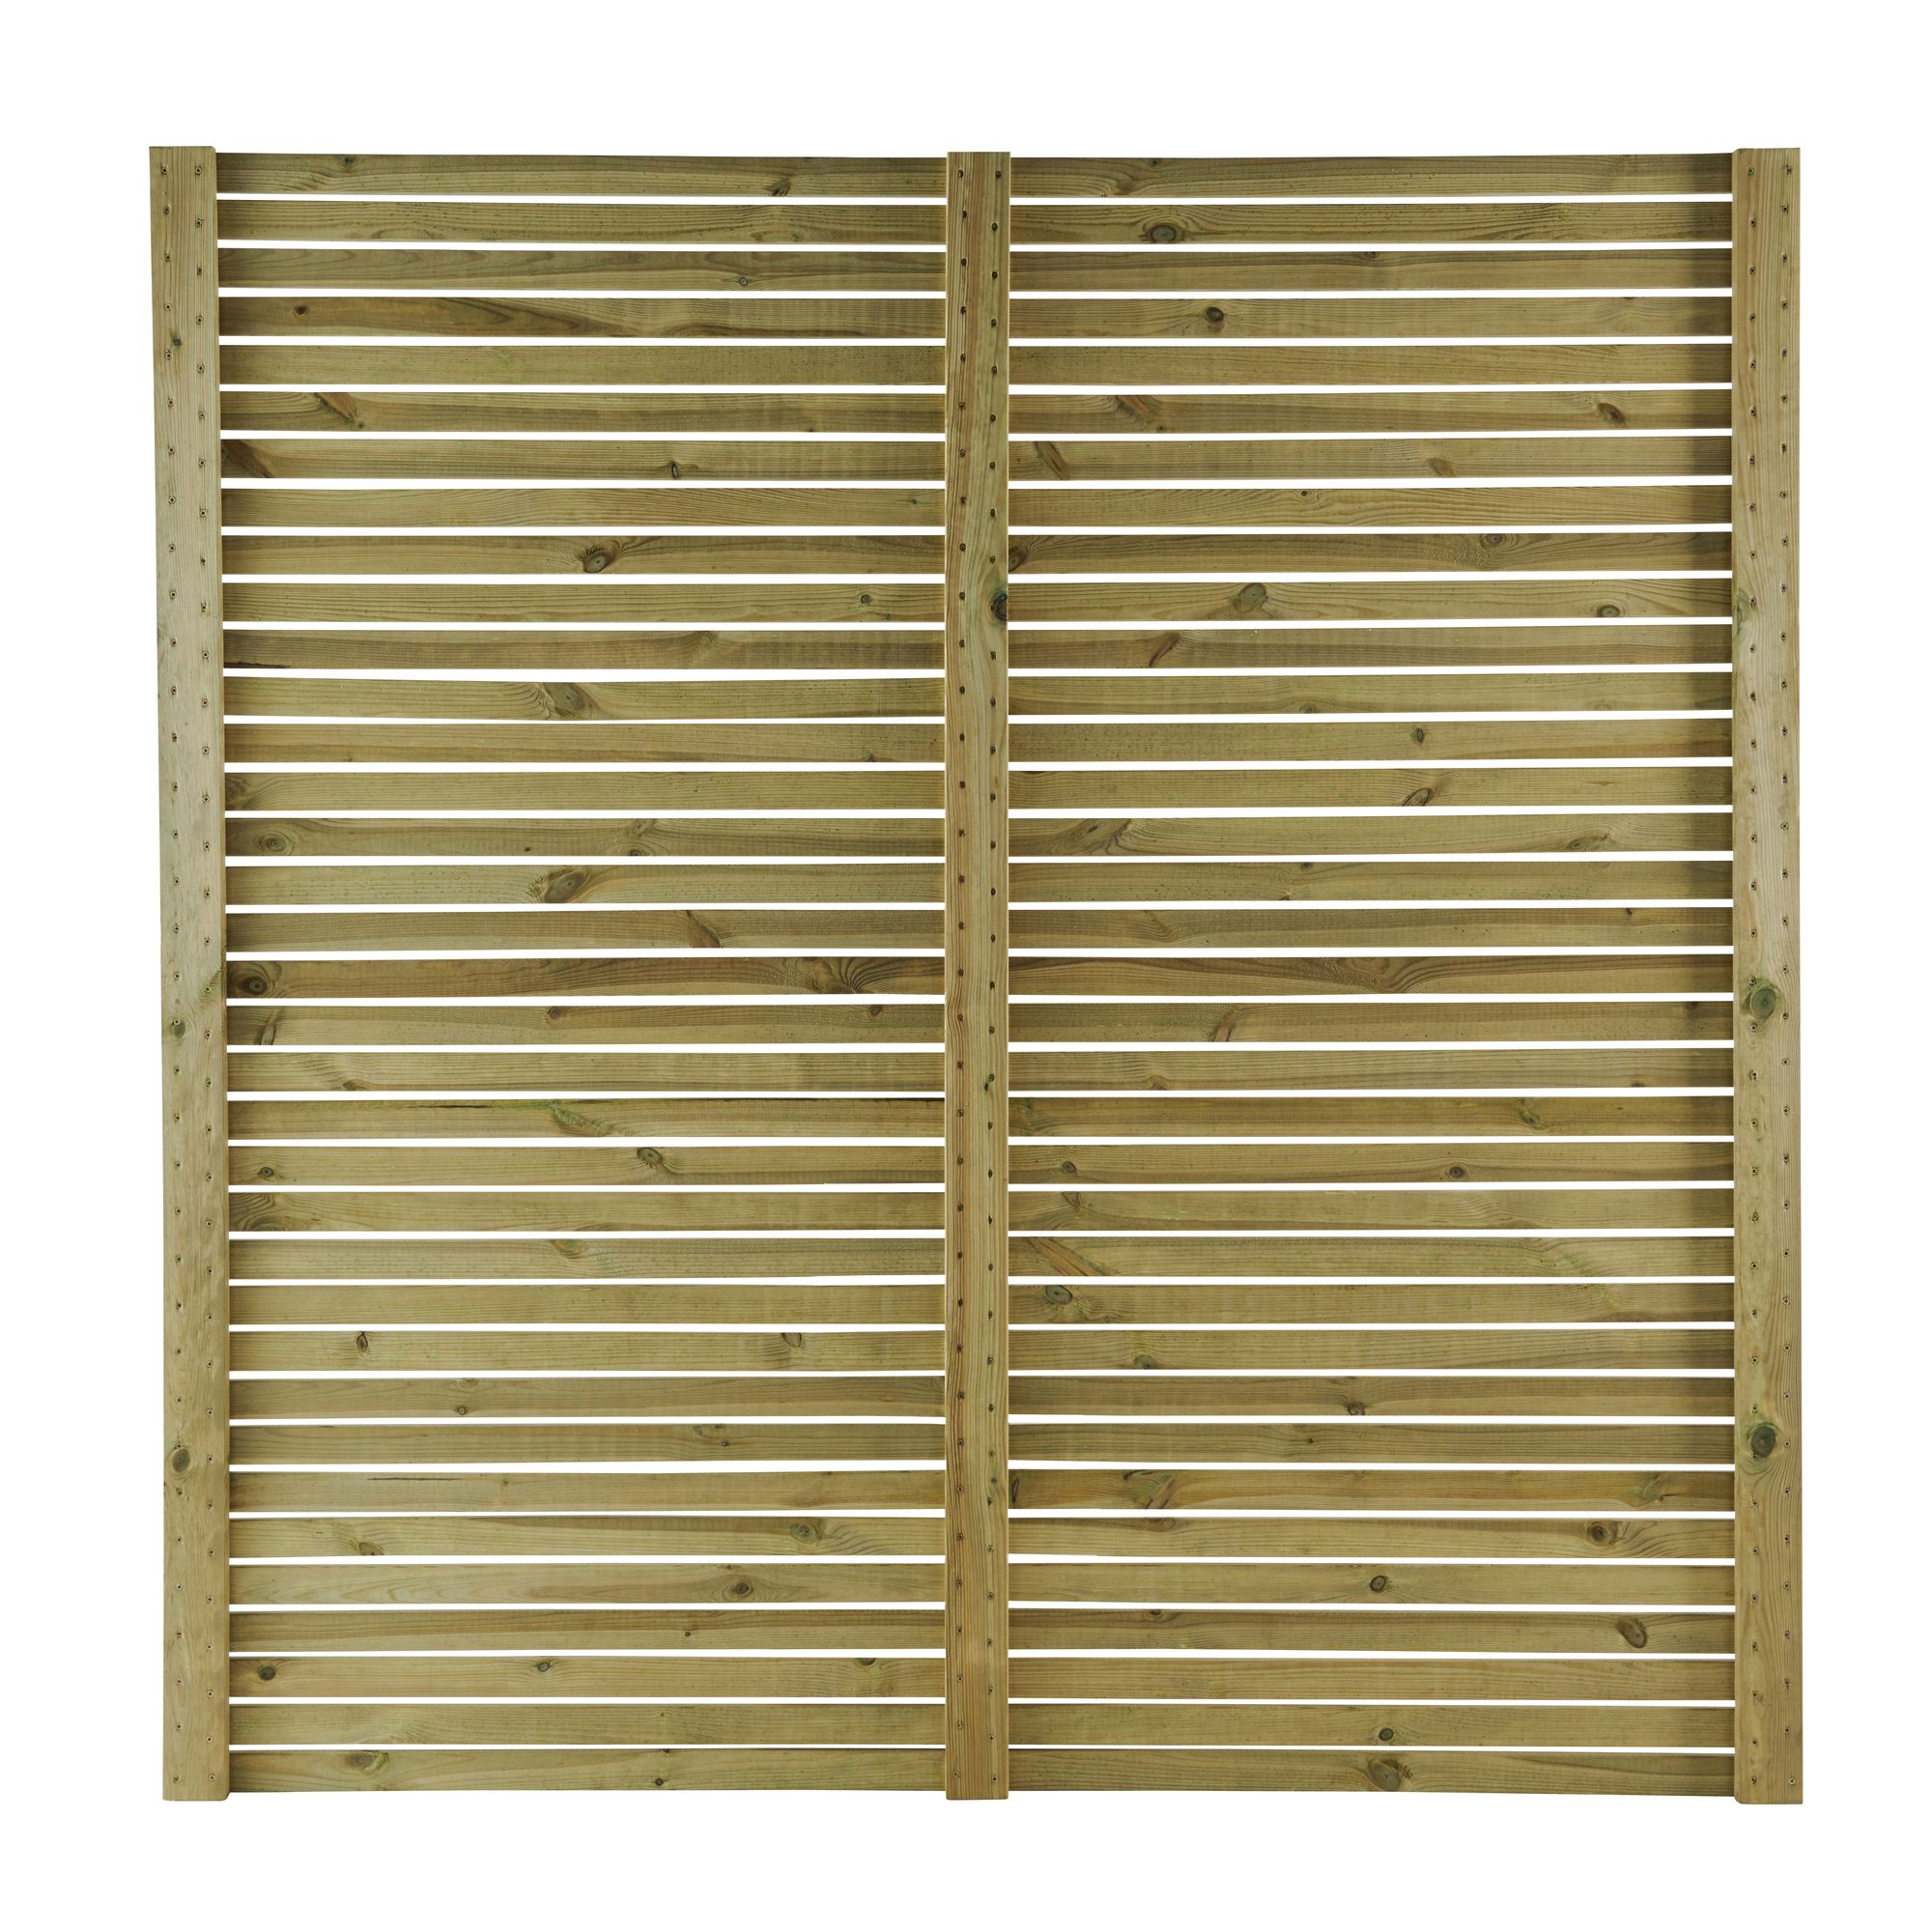 Klikstrom Lemhi Contemporary Closeboard Autoclave & pressure treated Wooden Fence panel (W)1.8m (H)1.8m